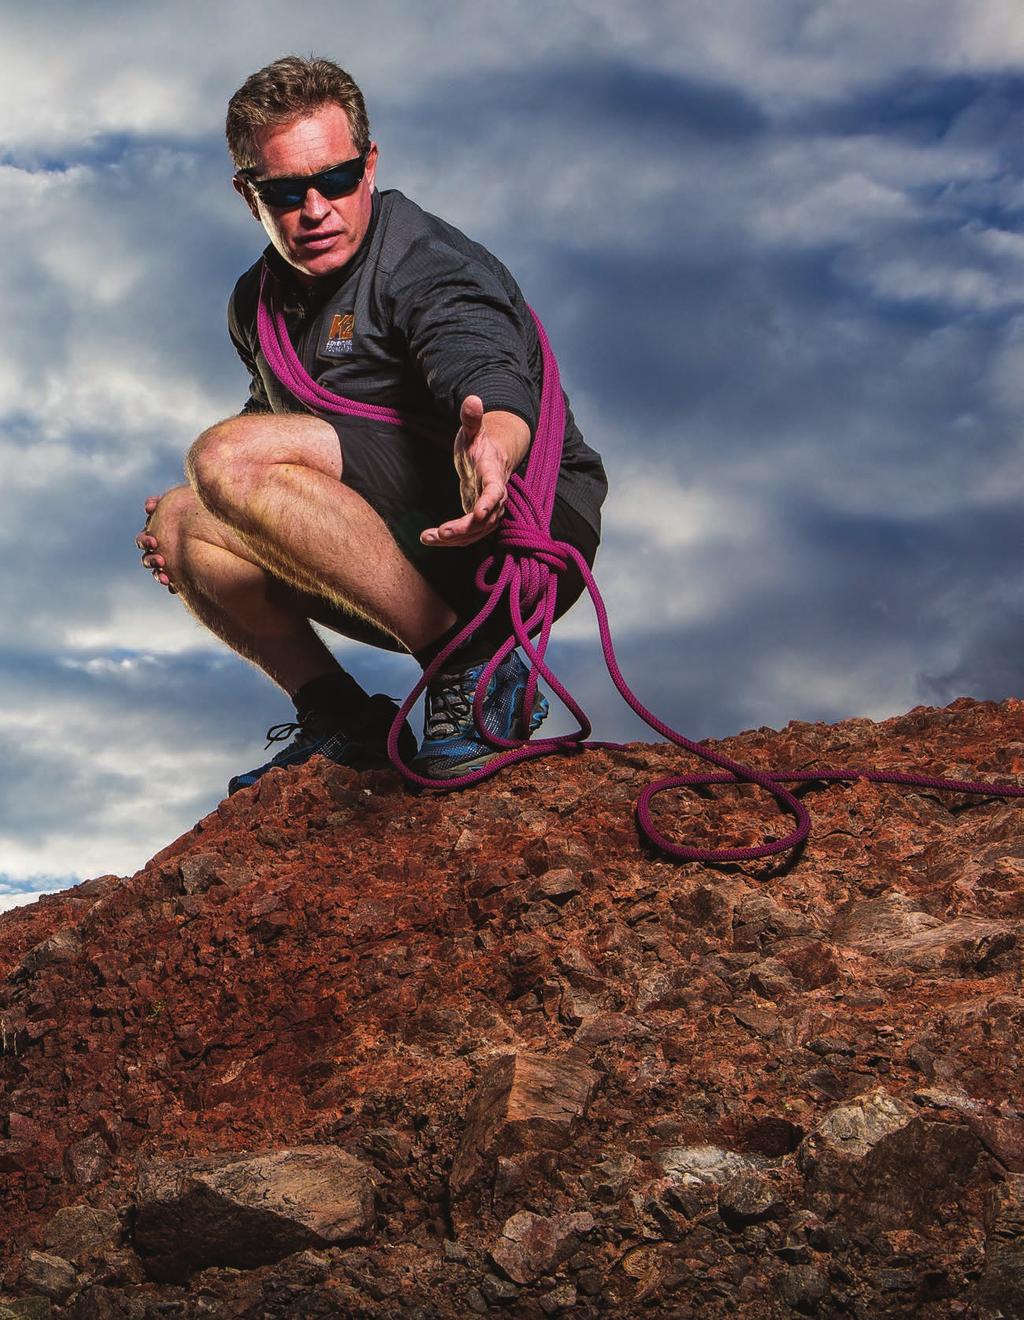 For many people, just simply climbing Camelback Mountain or Tom s Thumb is quite an